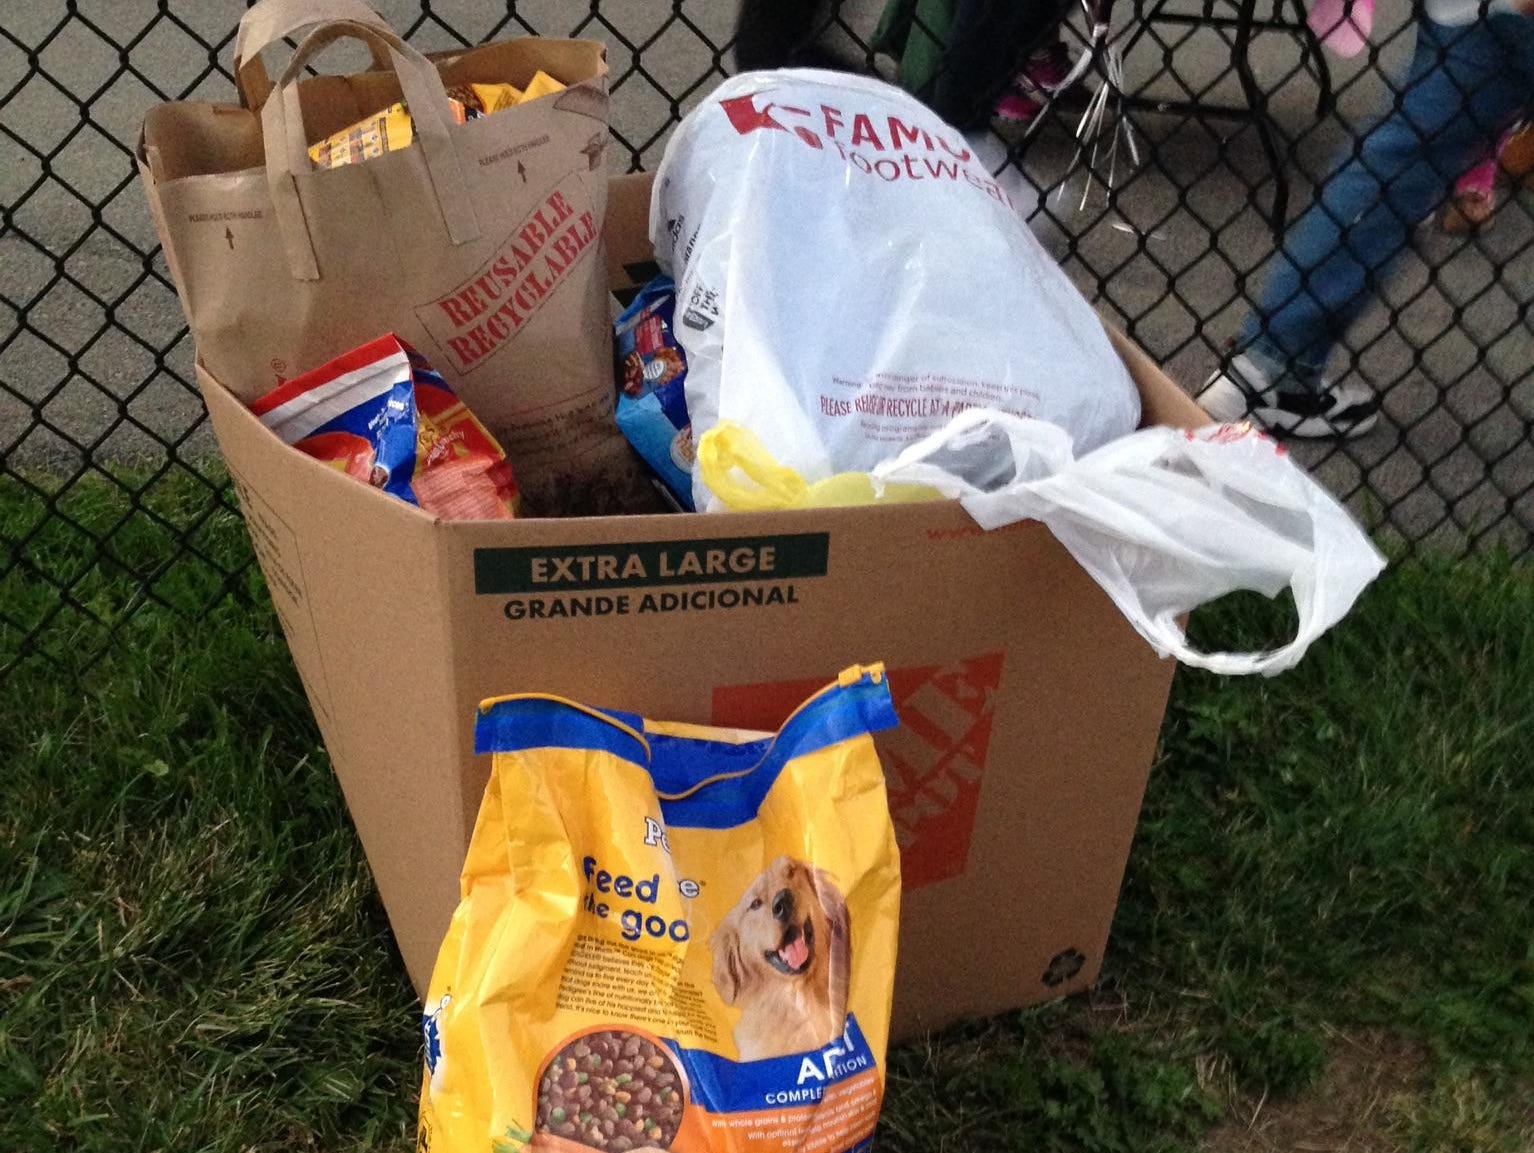 Some of the goods that were collected during Friday's Ketcham-Yorktown field hockey game that will go to the SPCA of Westchester